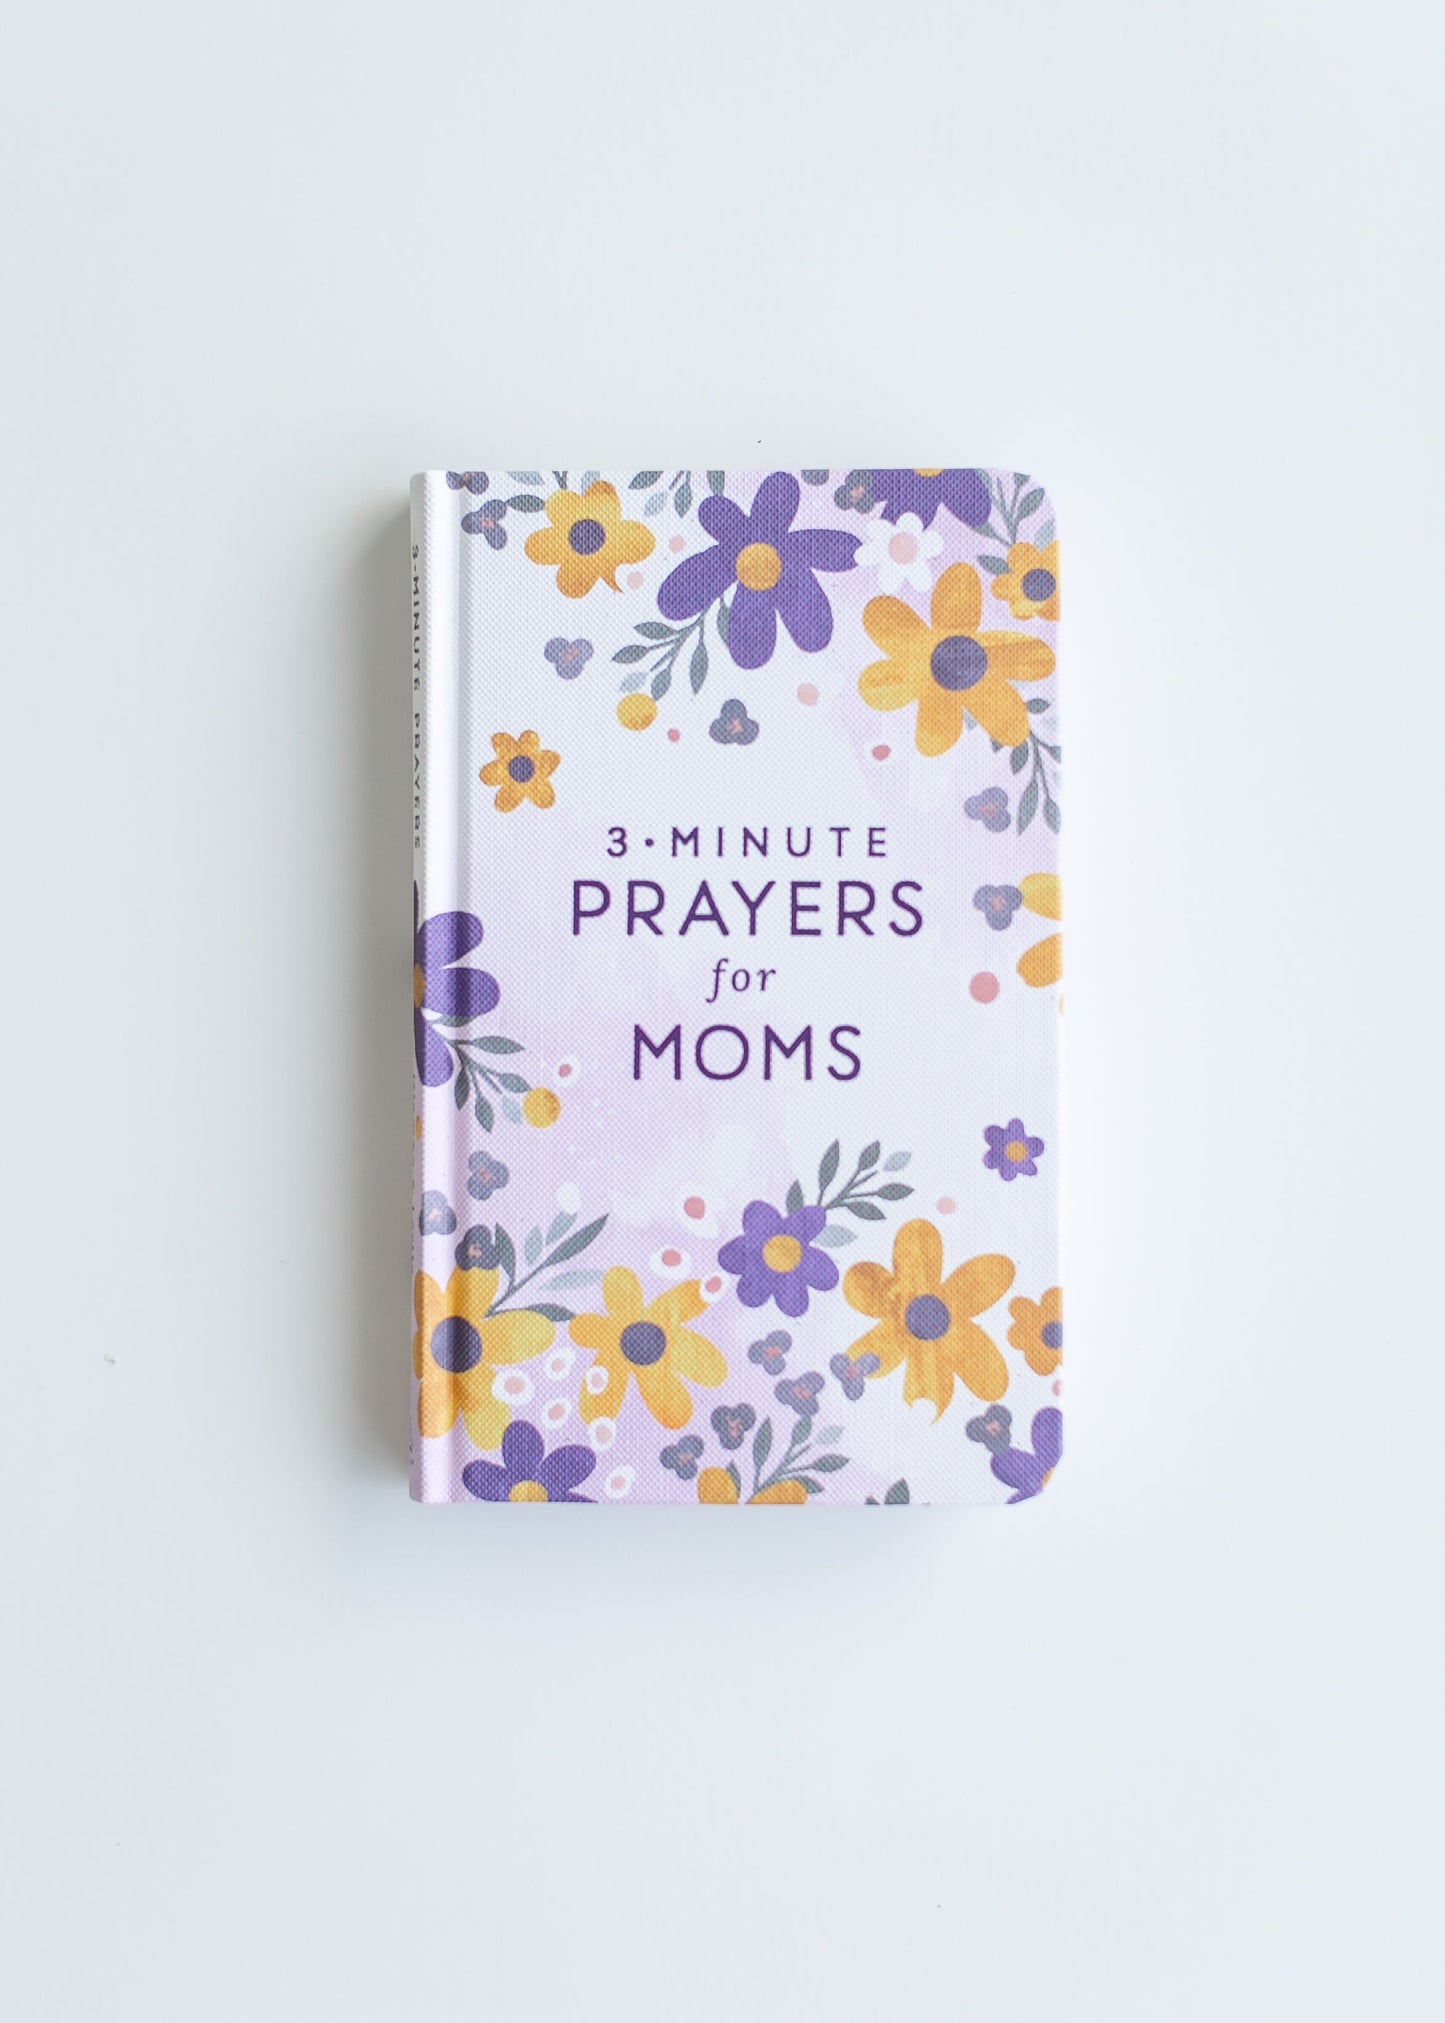 3-Minute Prayers for Moms Devotional Book Gifts